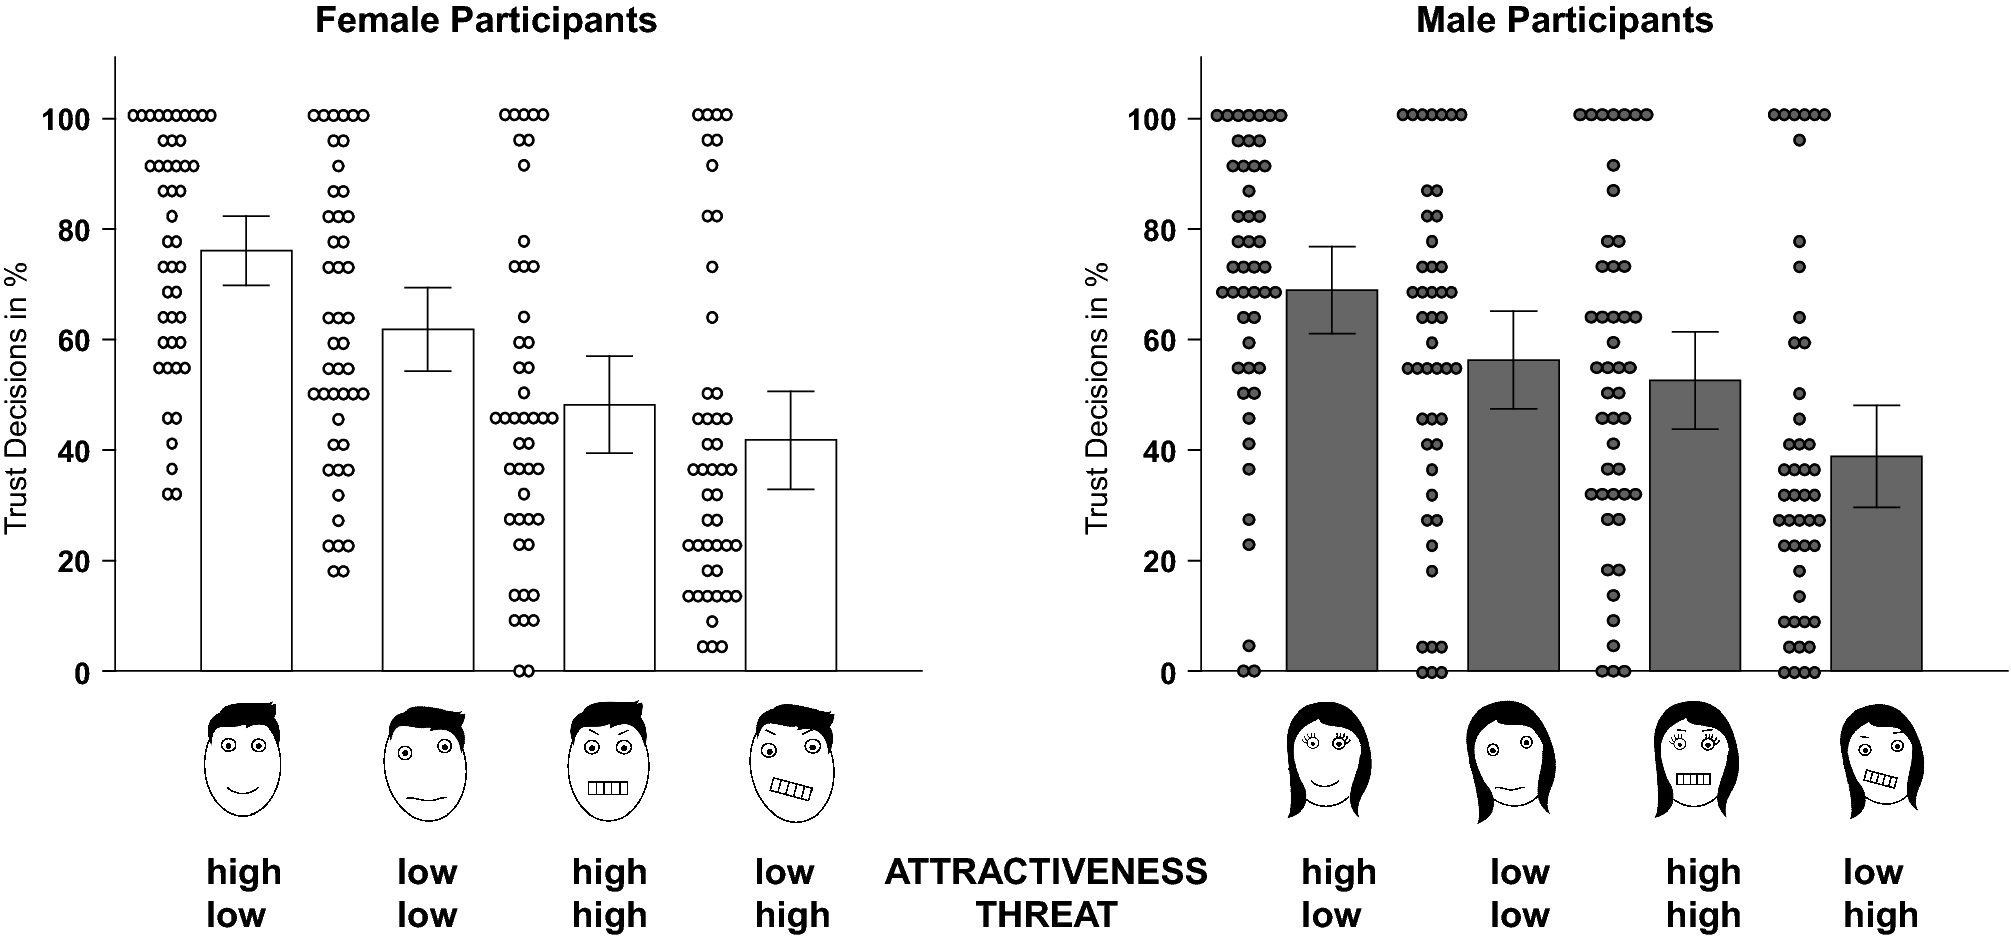 11 Qualities in Men That Women Find Attractive, According to Science